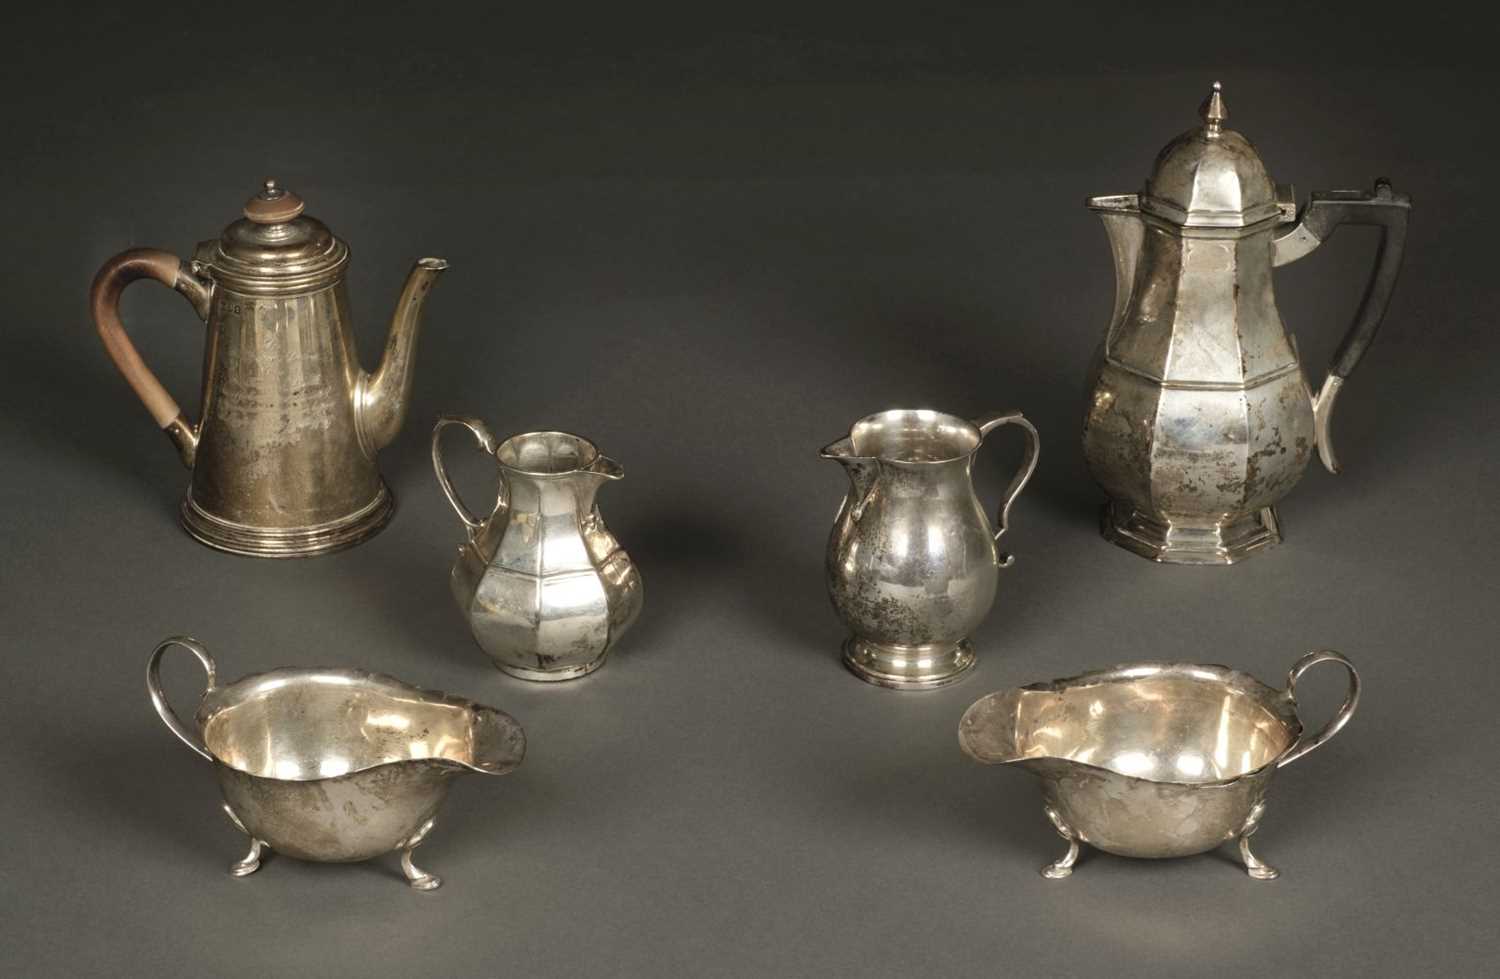 Lot 33 - Mixed Silver. A heavy-gauge coffee pot and other items